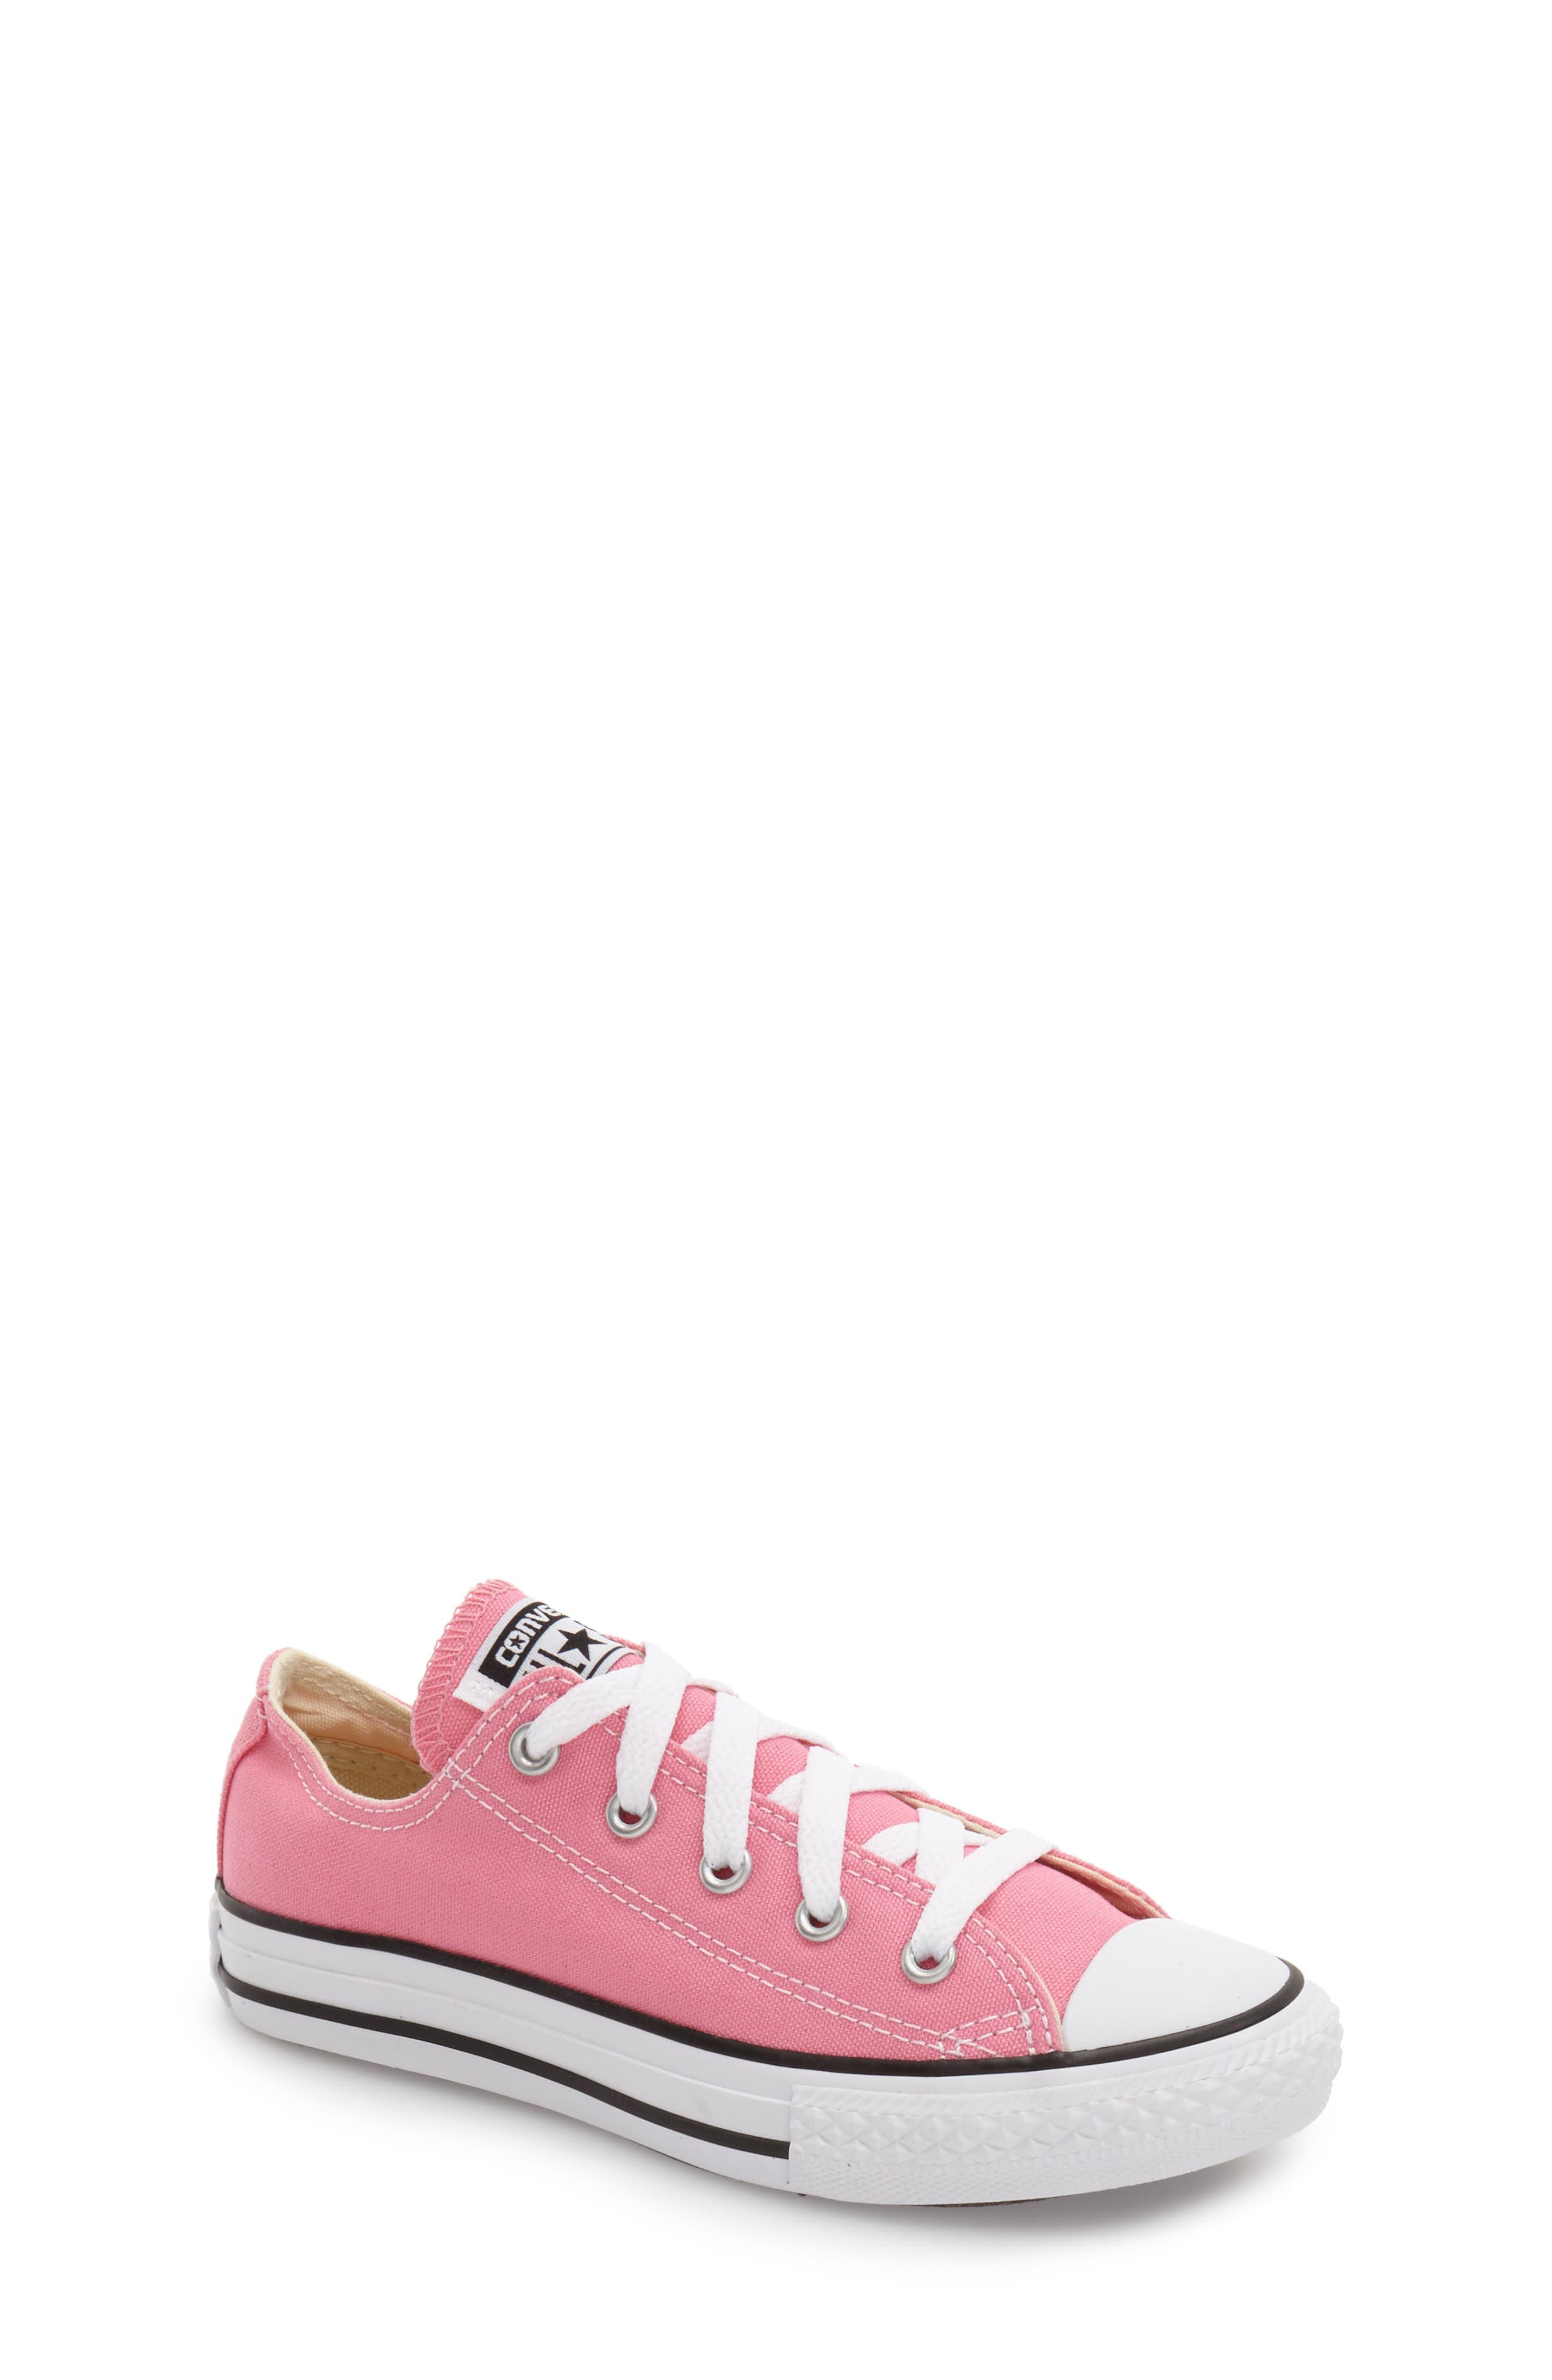 UPC 022866377669 product image for Converse Chuck Taylor Sneaker (Toddler & Little Kid) Pink 1 M | upcitemdb.com